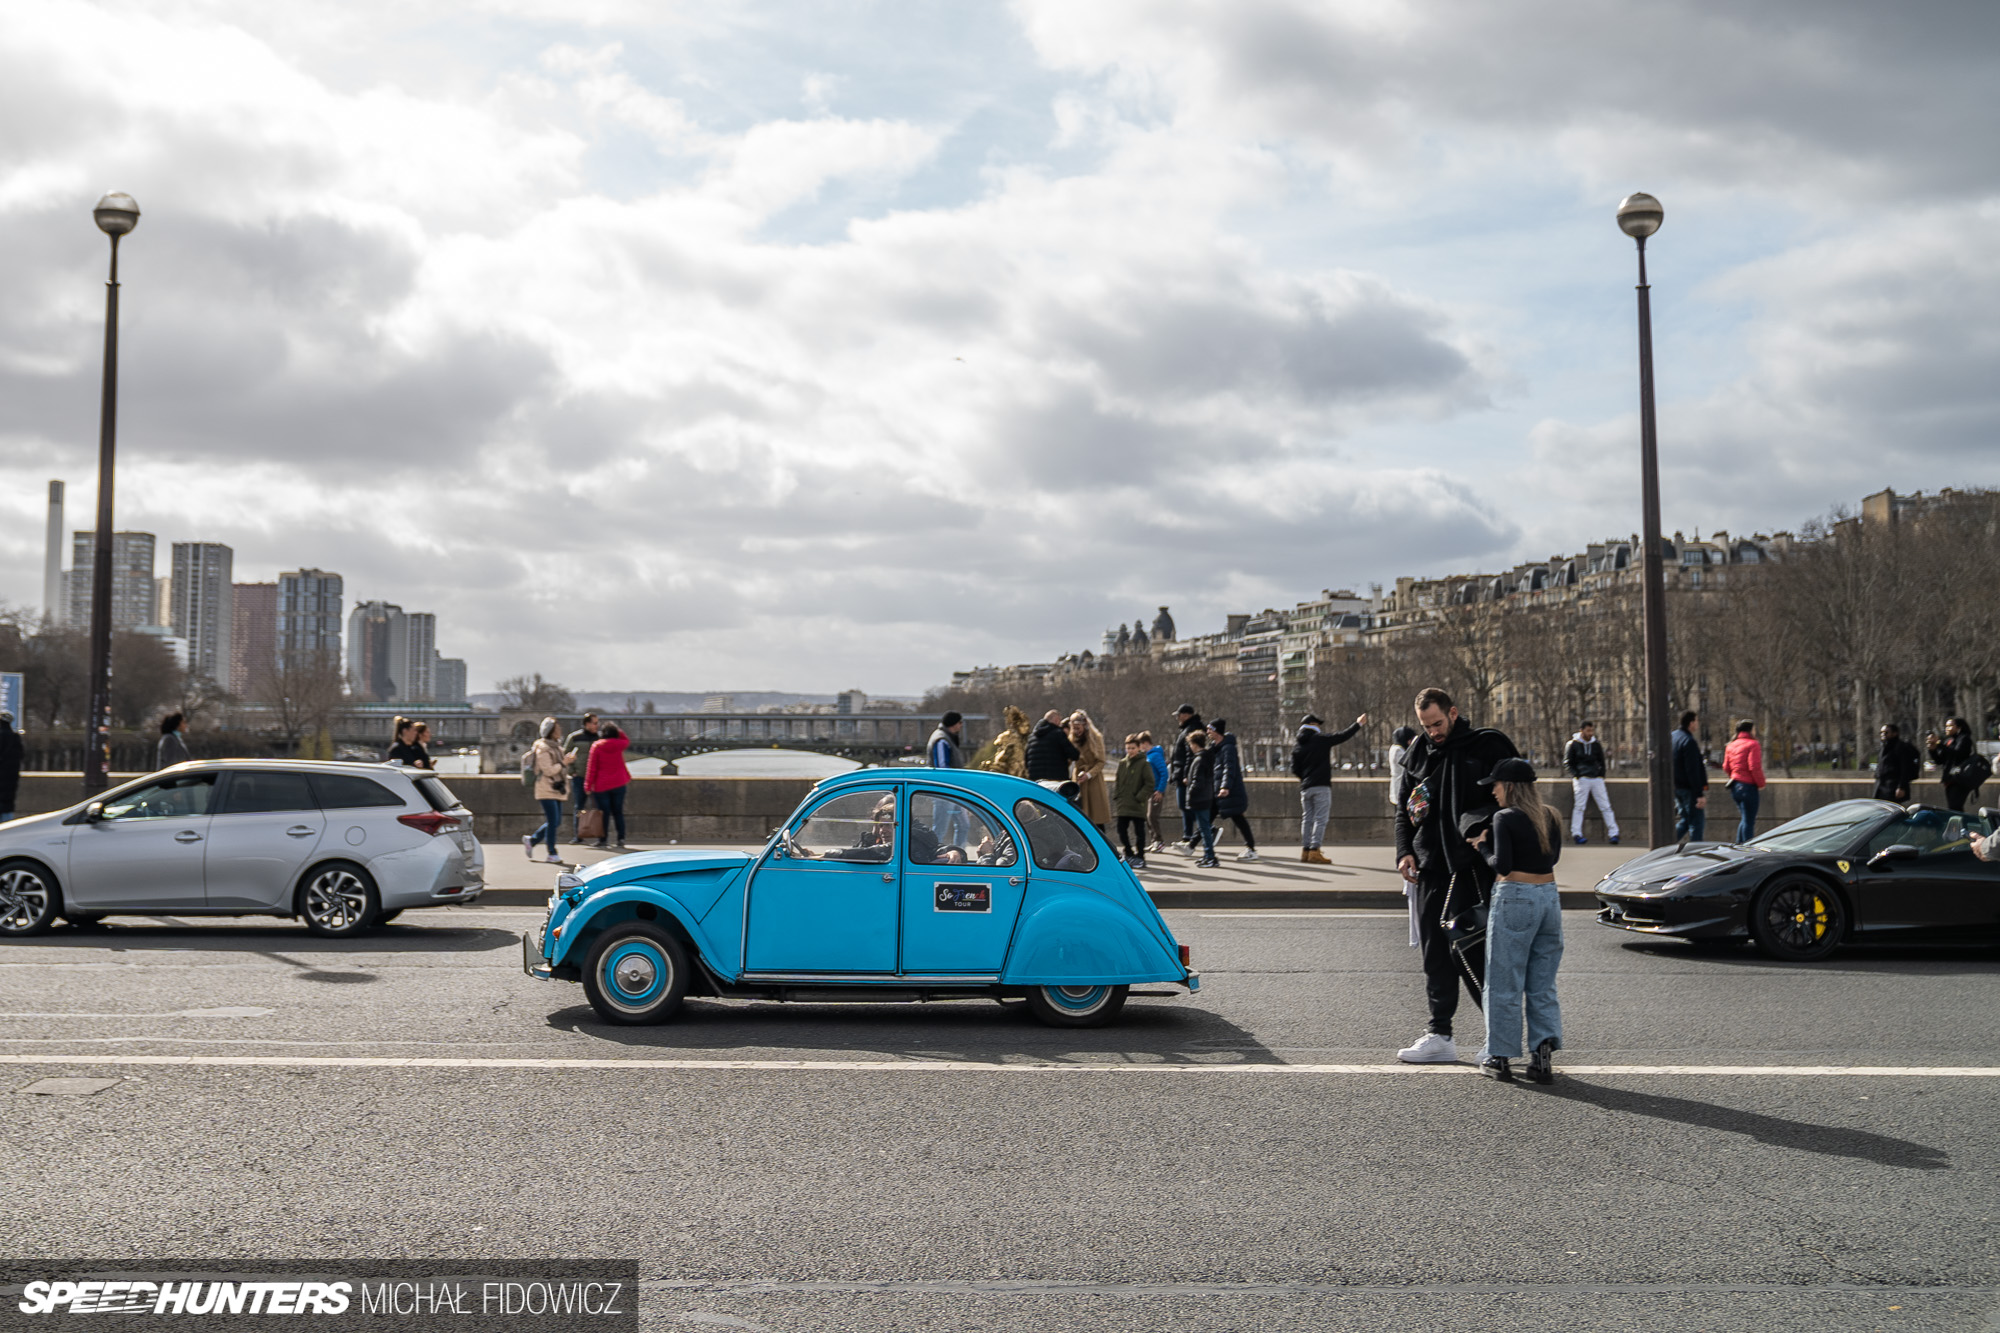 plaques, passion, paris, of, mildly, interesting, hatchbacks, french, france, culture, carspotting, cars, from paris with love